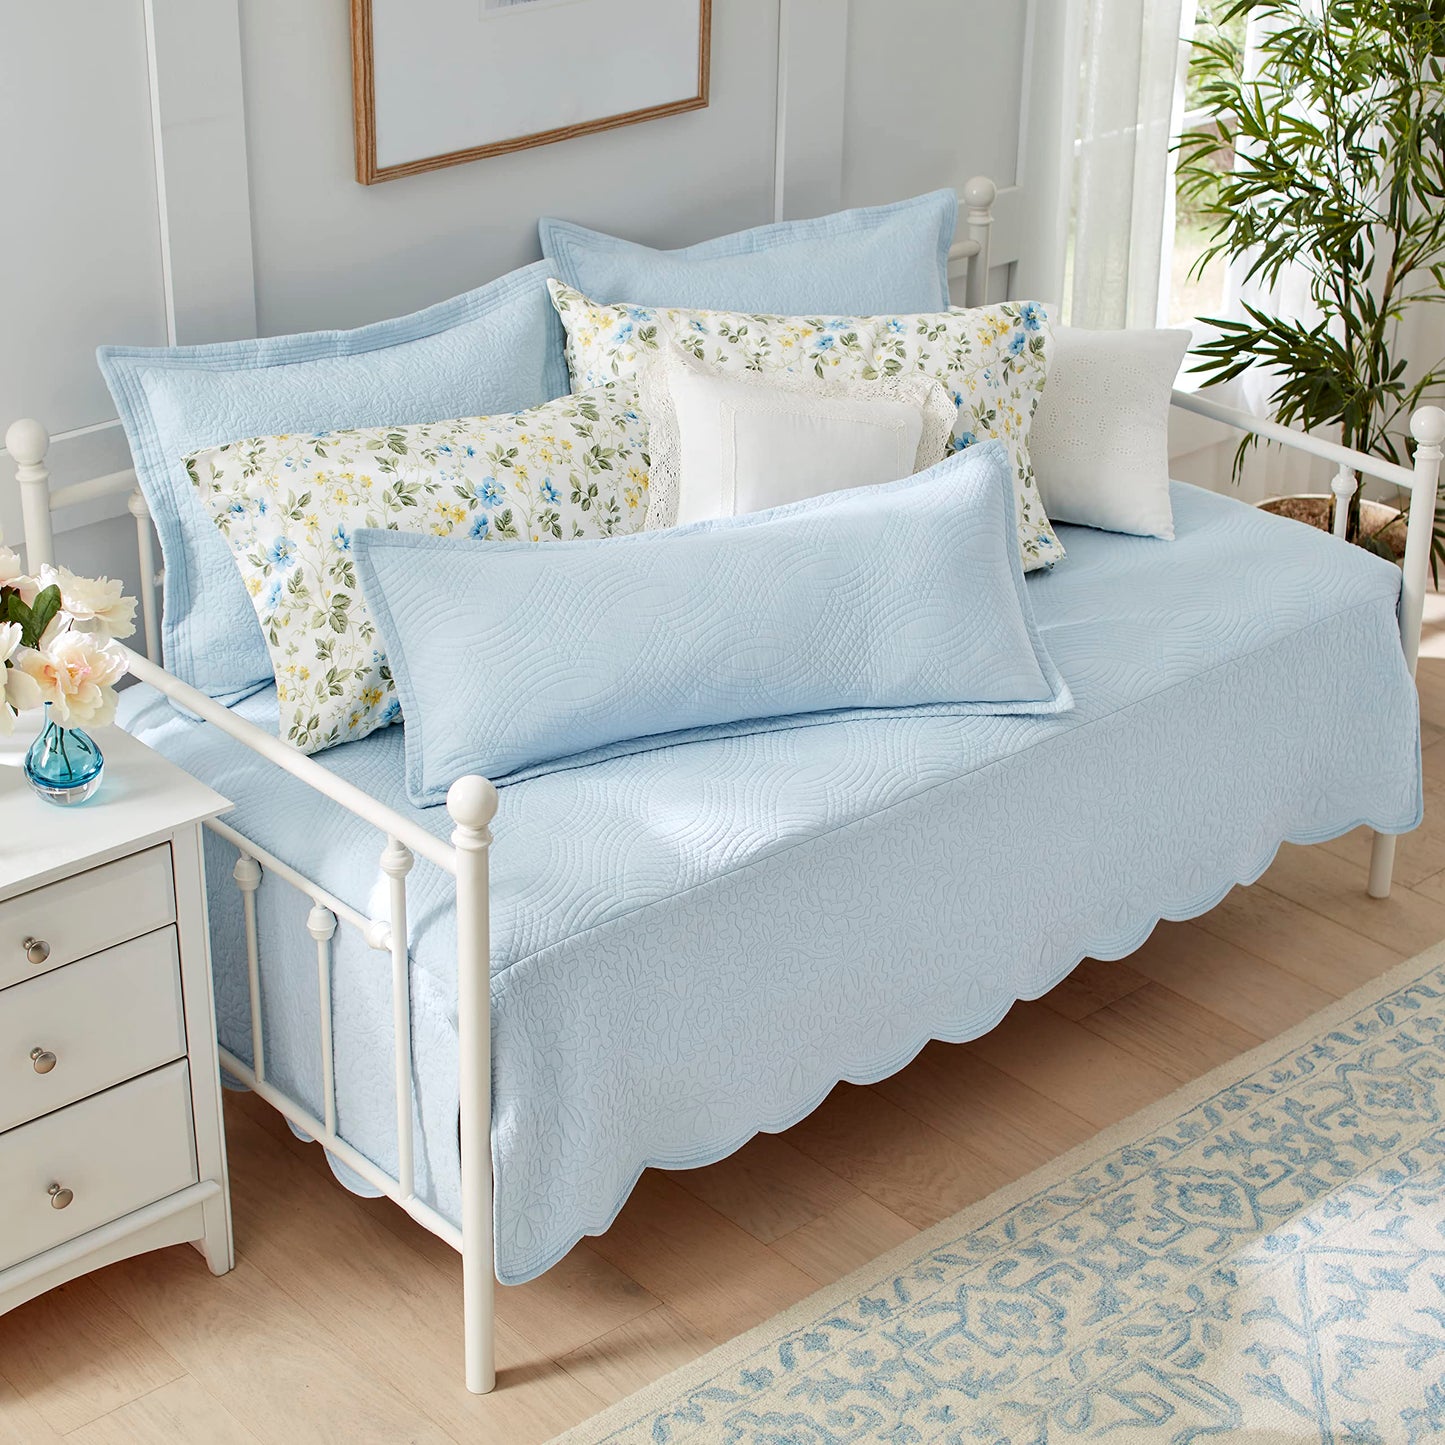 Laura Ashley - Daybed Set, 4 Piece Cotton Bedding Set, All Season Farmhouse Home Decor (Solid Trellis Blue, Daybed)